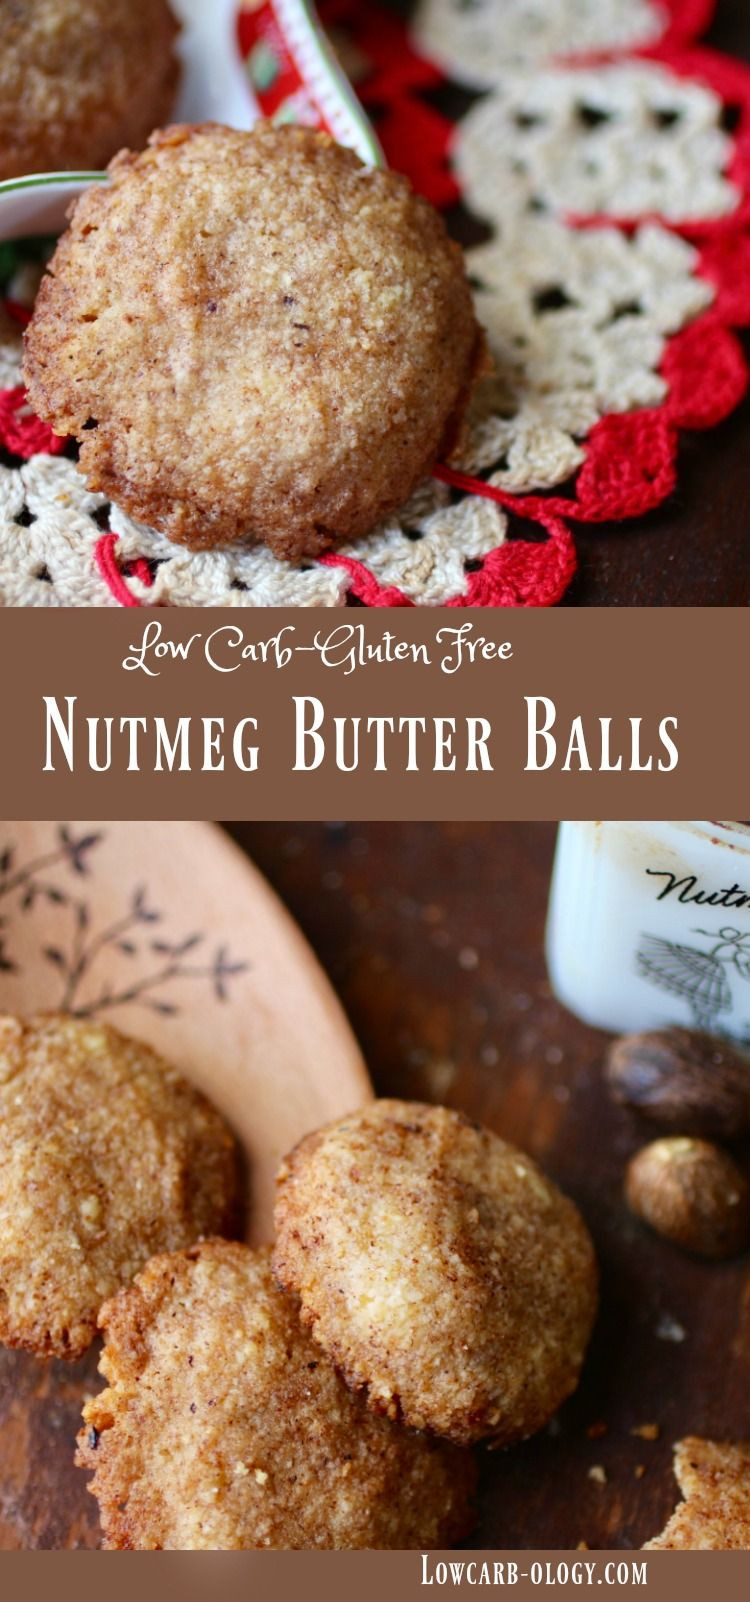 Low Carb Holiday Desserts
 Low Carb Christmas Cookies Nutmeg Butter Balls lowcarb